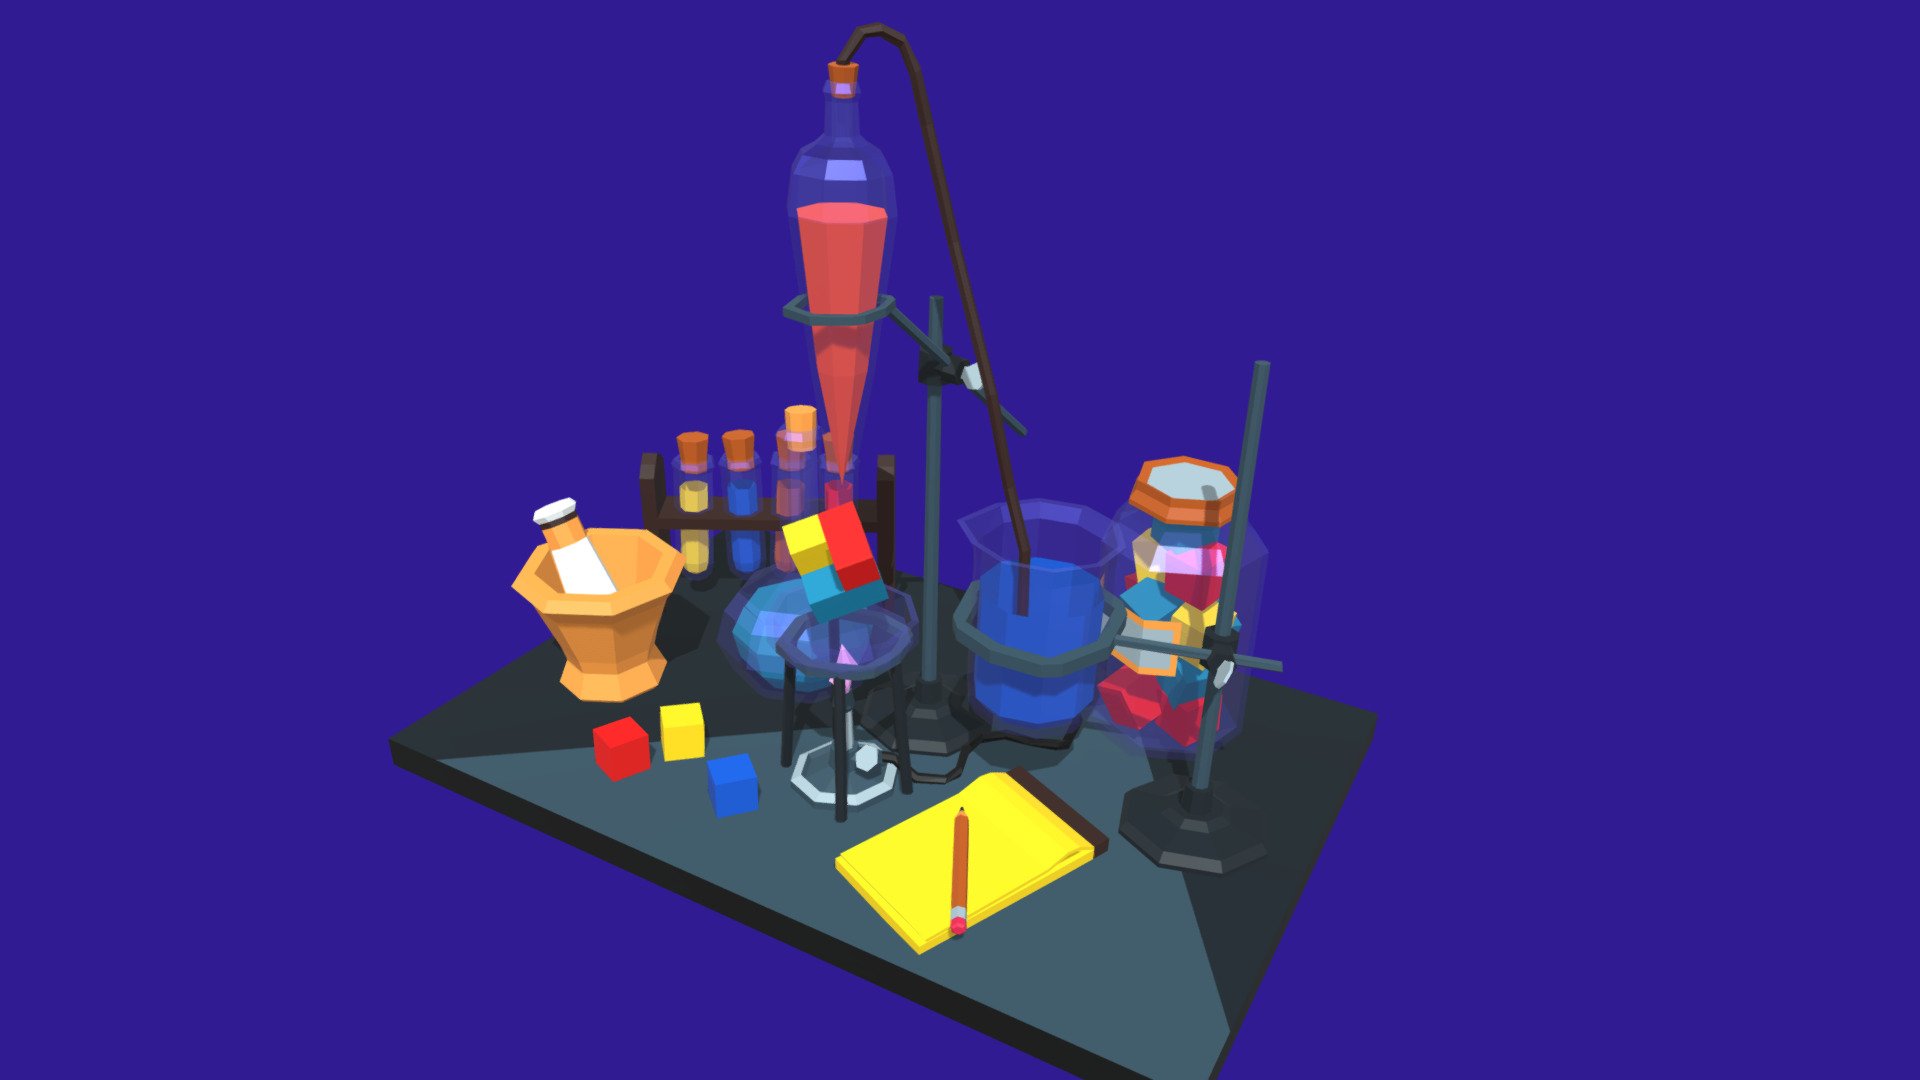 Celebrating the debut of Google Blocks Lab setting with some blocky lab equipment!

Imported from Poly (#atB26Z6BPd0) - Blocks Lab Equipment - Download Free 3D model by djcarson 3d model